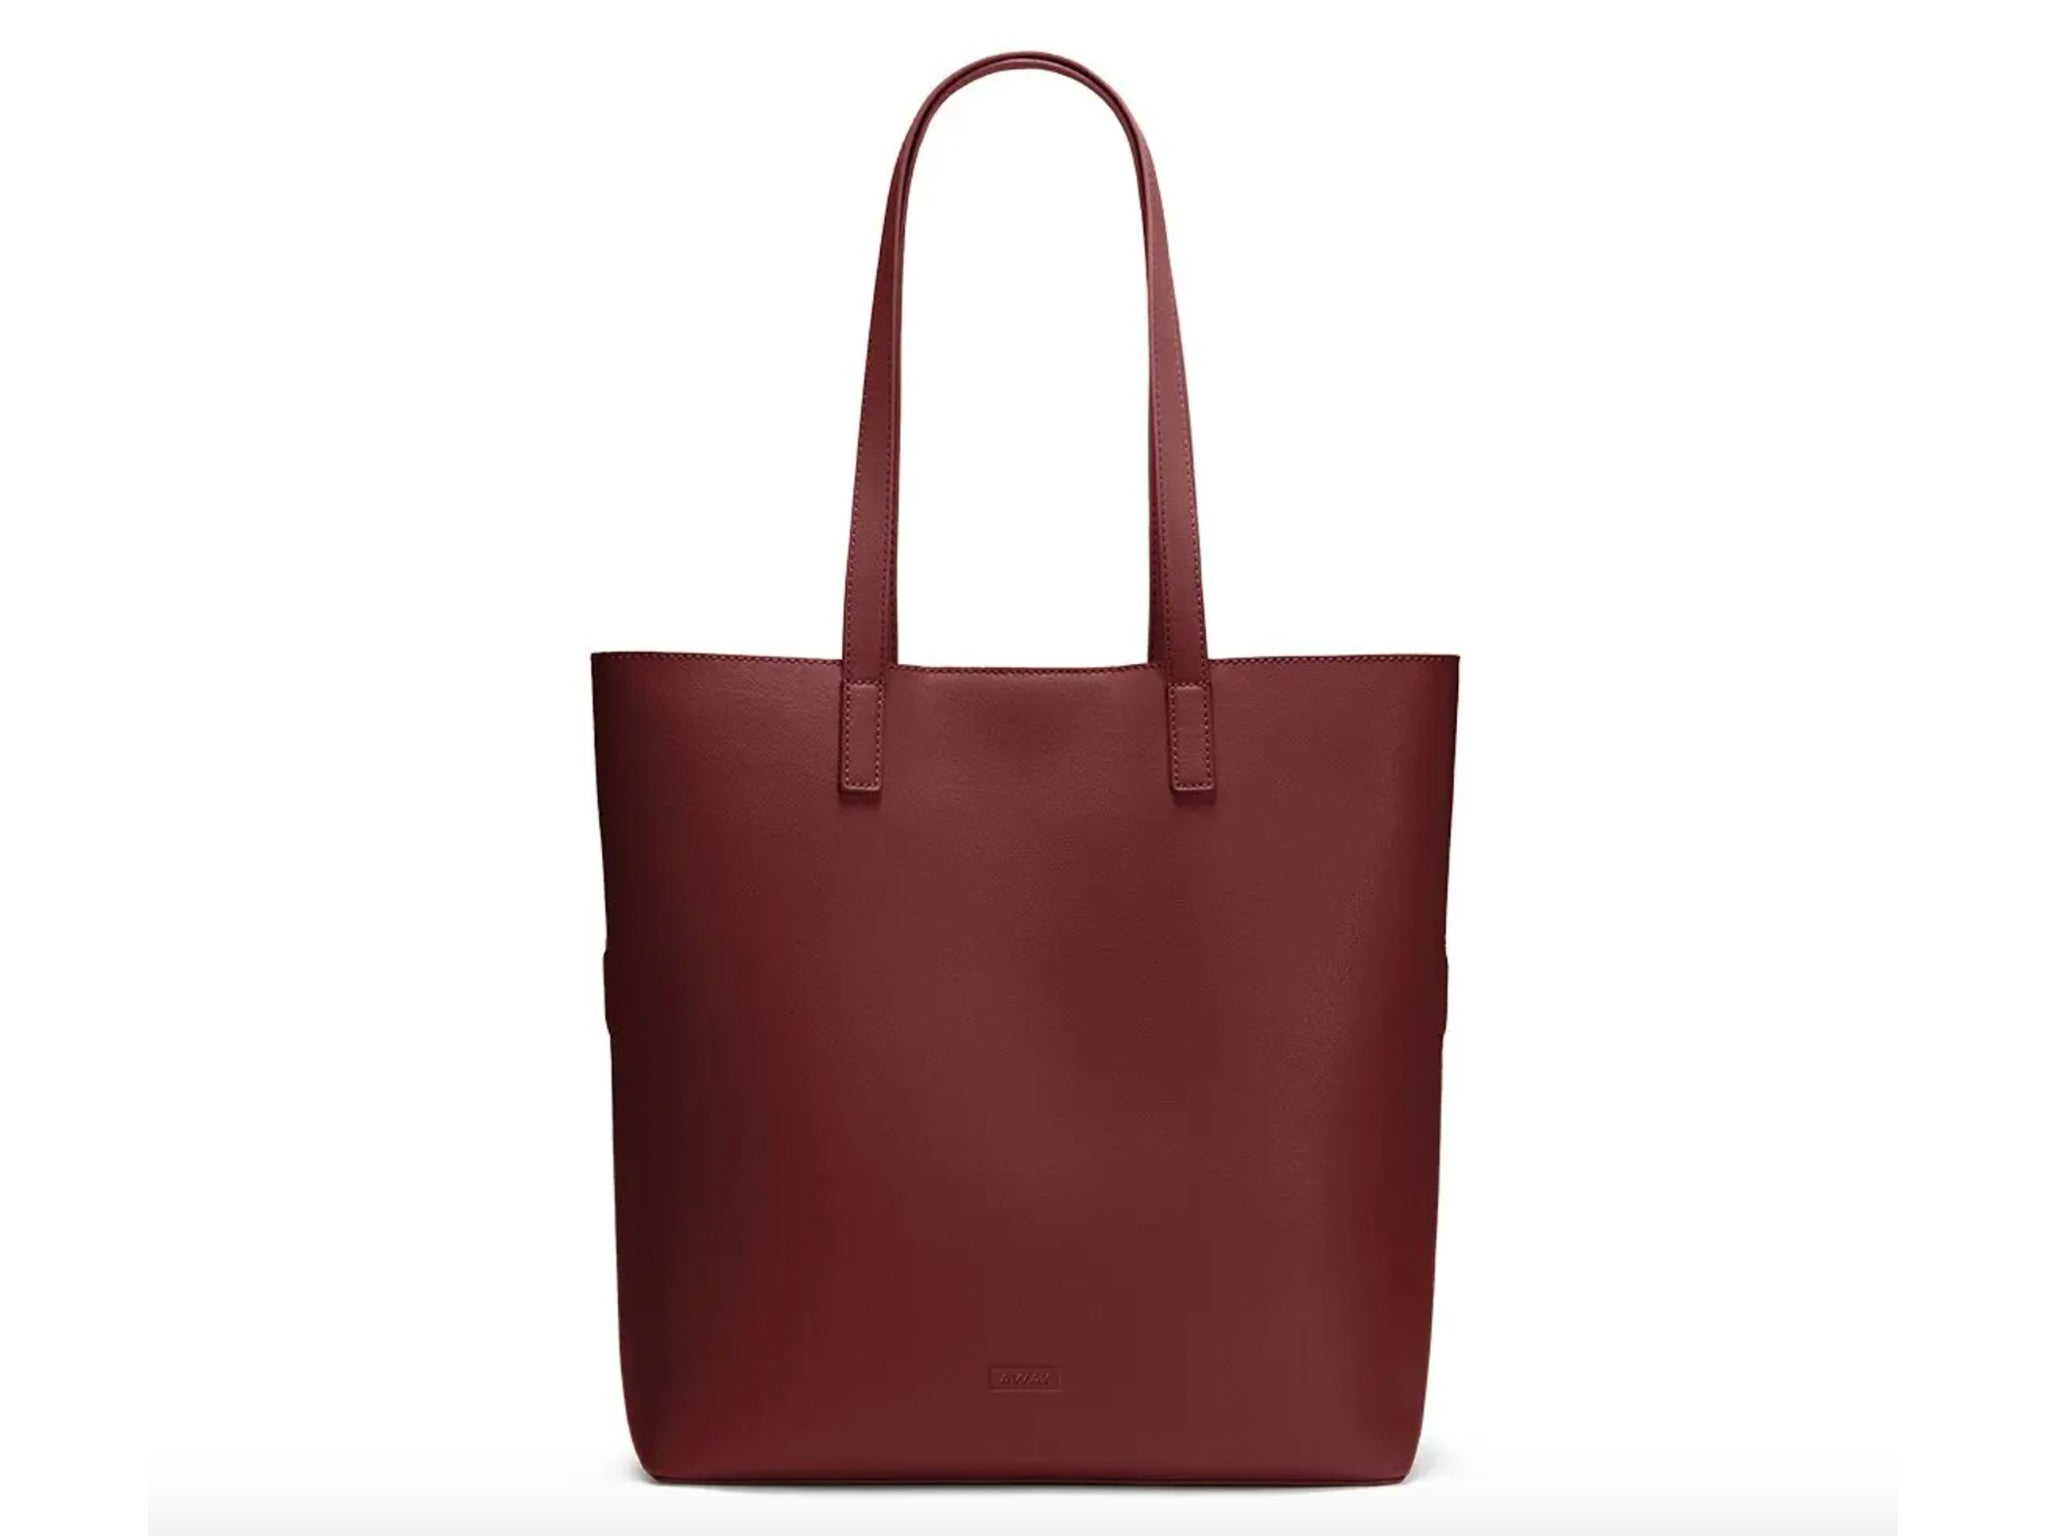 This tote bag is ideal for a carry-on handbag for a short trip or for part time visits back to the office